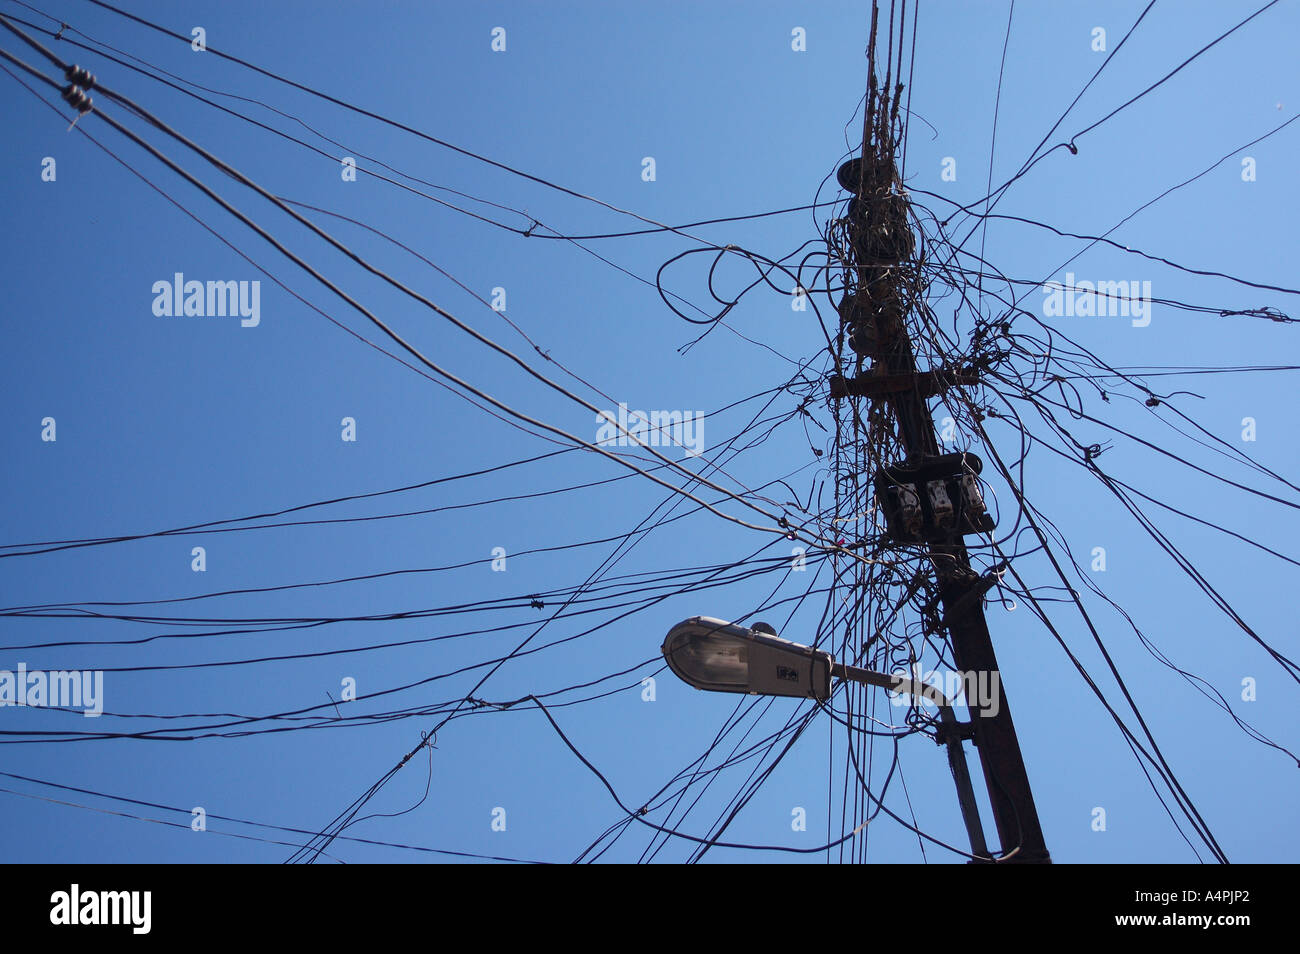 Stealing electricity ; Power theft ; Electricity pole ; Electric pole ; street light pole ; pole complicated wiring ; India ; Indian ; Asia ; Asian Stock Photo